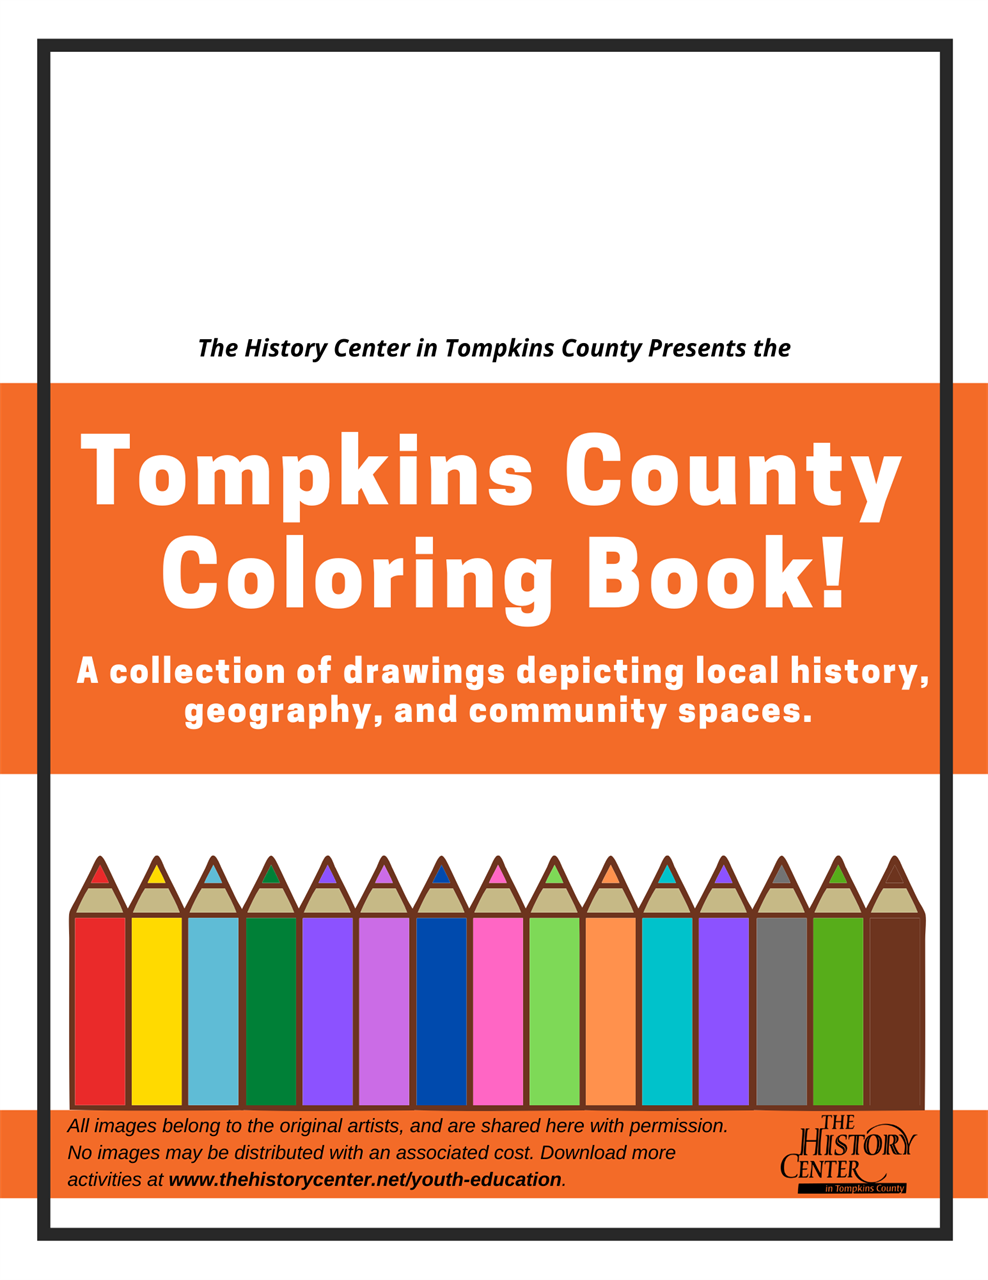 A link/image to download the Tompkins County coloring book